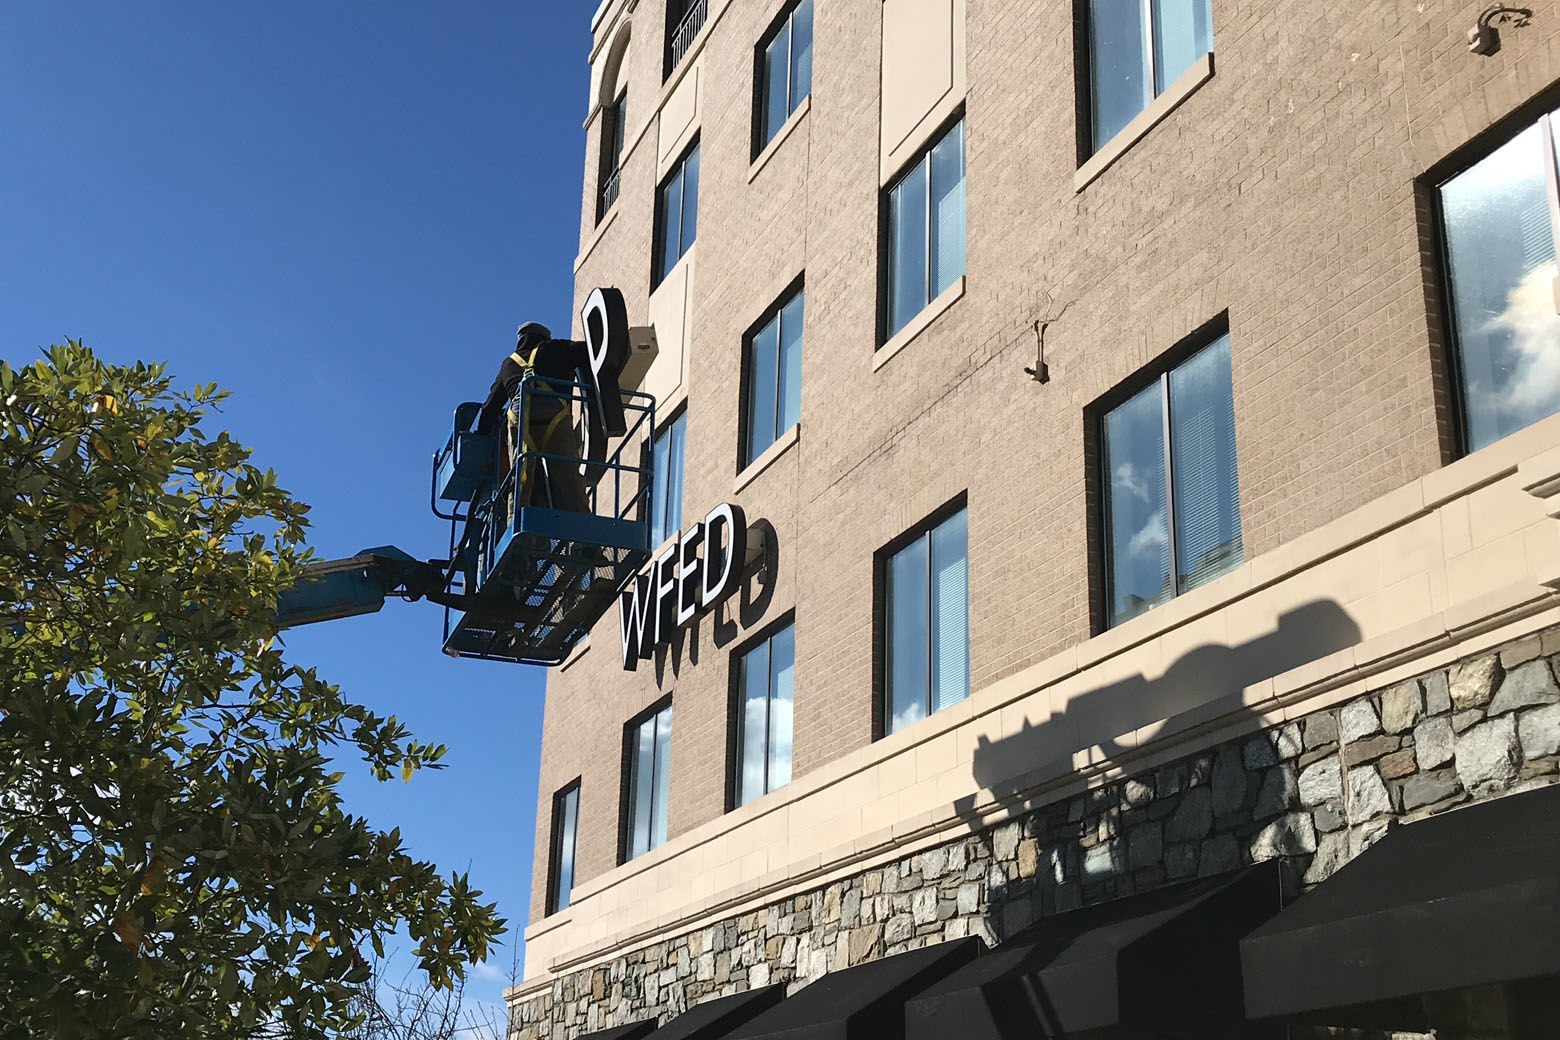 Crews removing WTOP's call letters from its Idaho Avenue location. (WTOP/Ginger Whitaker)